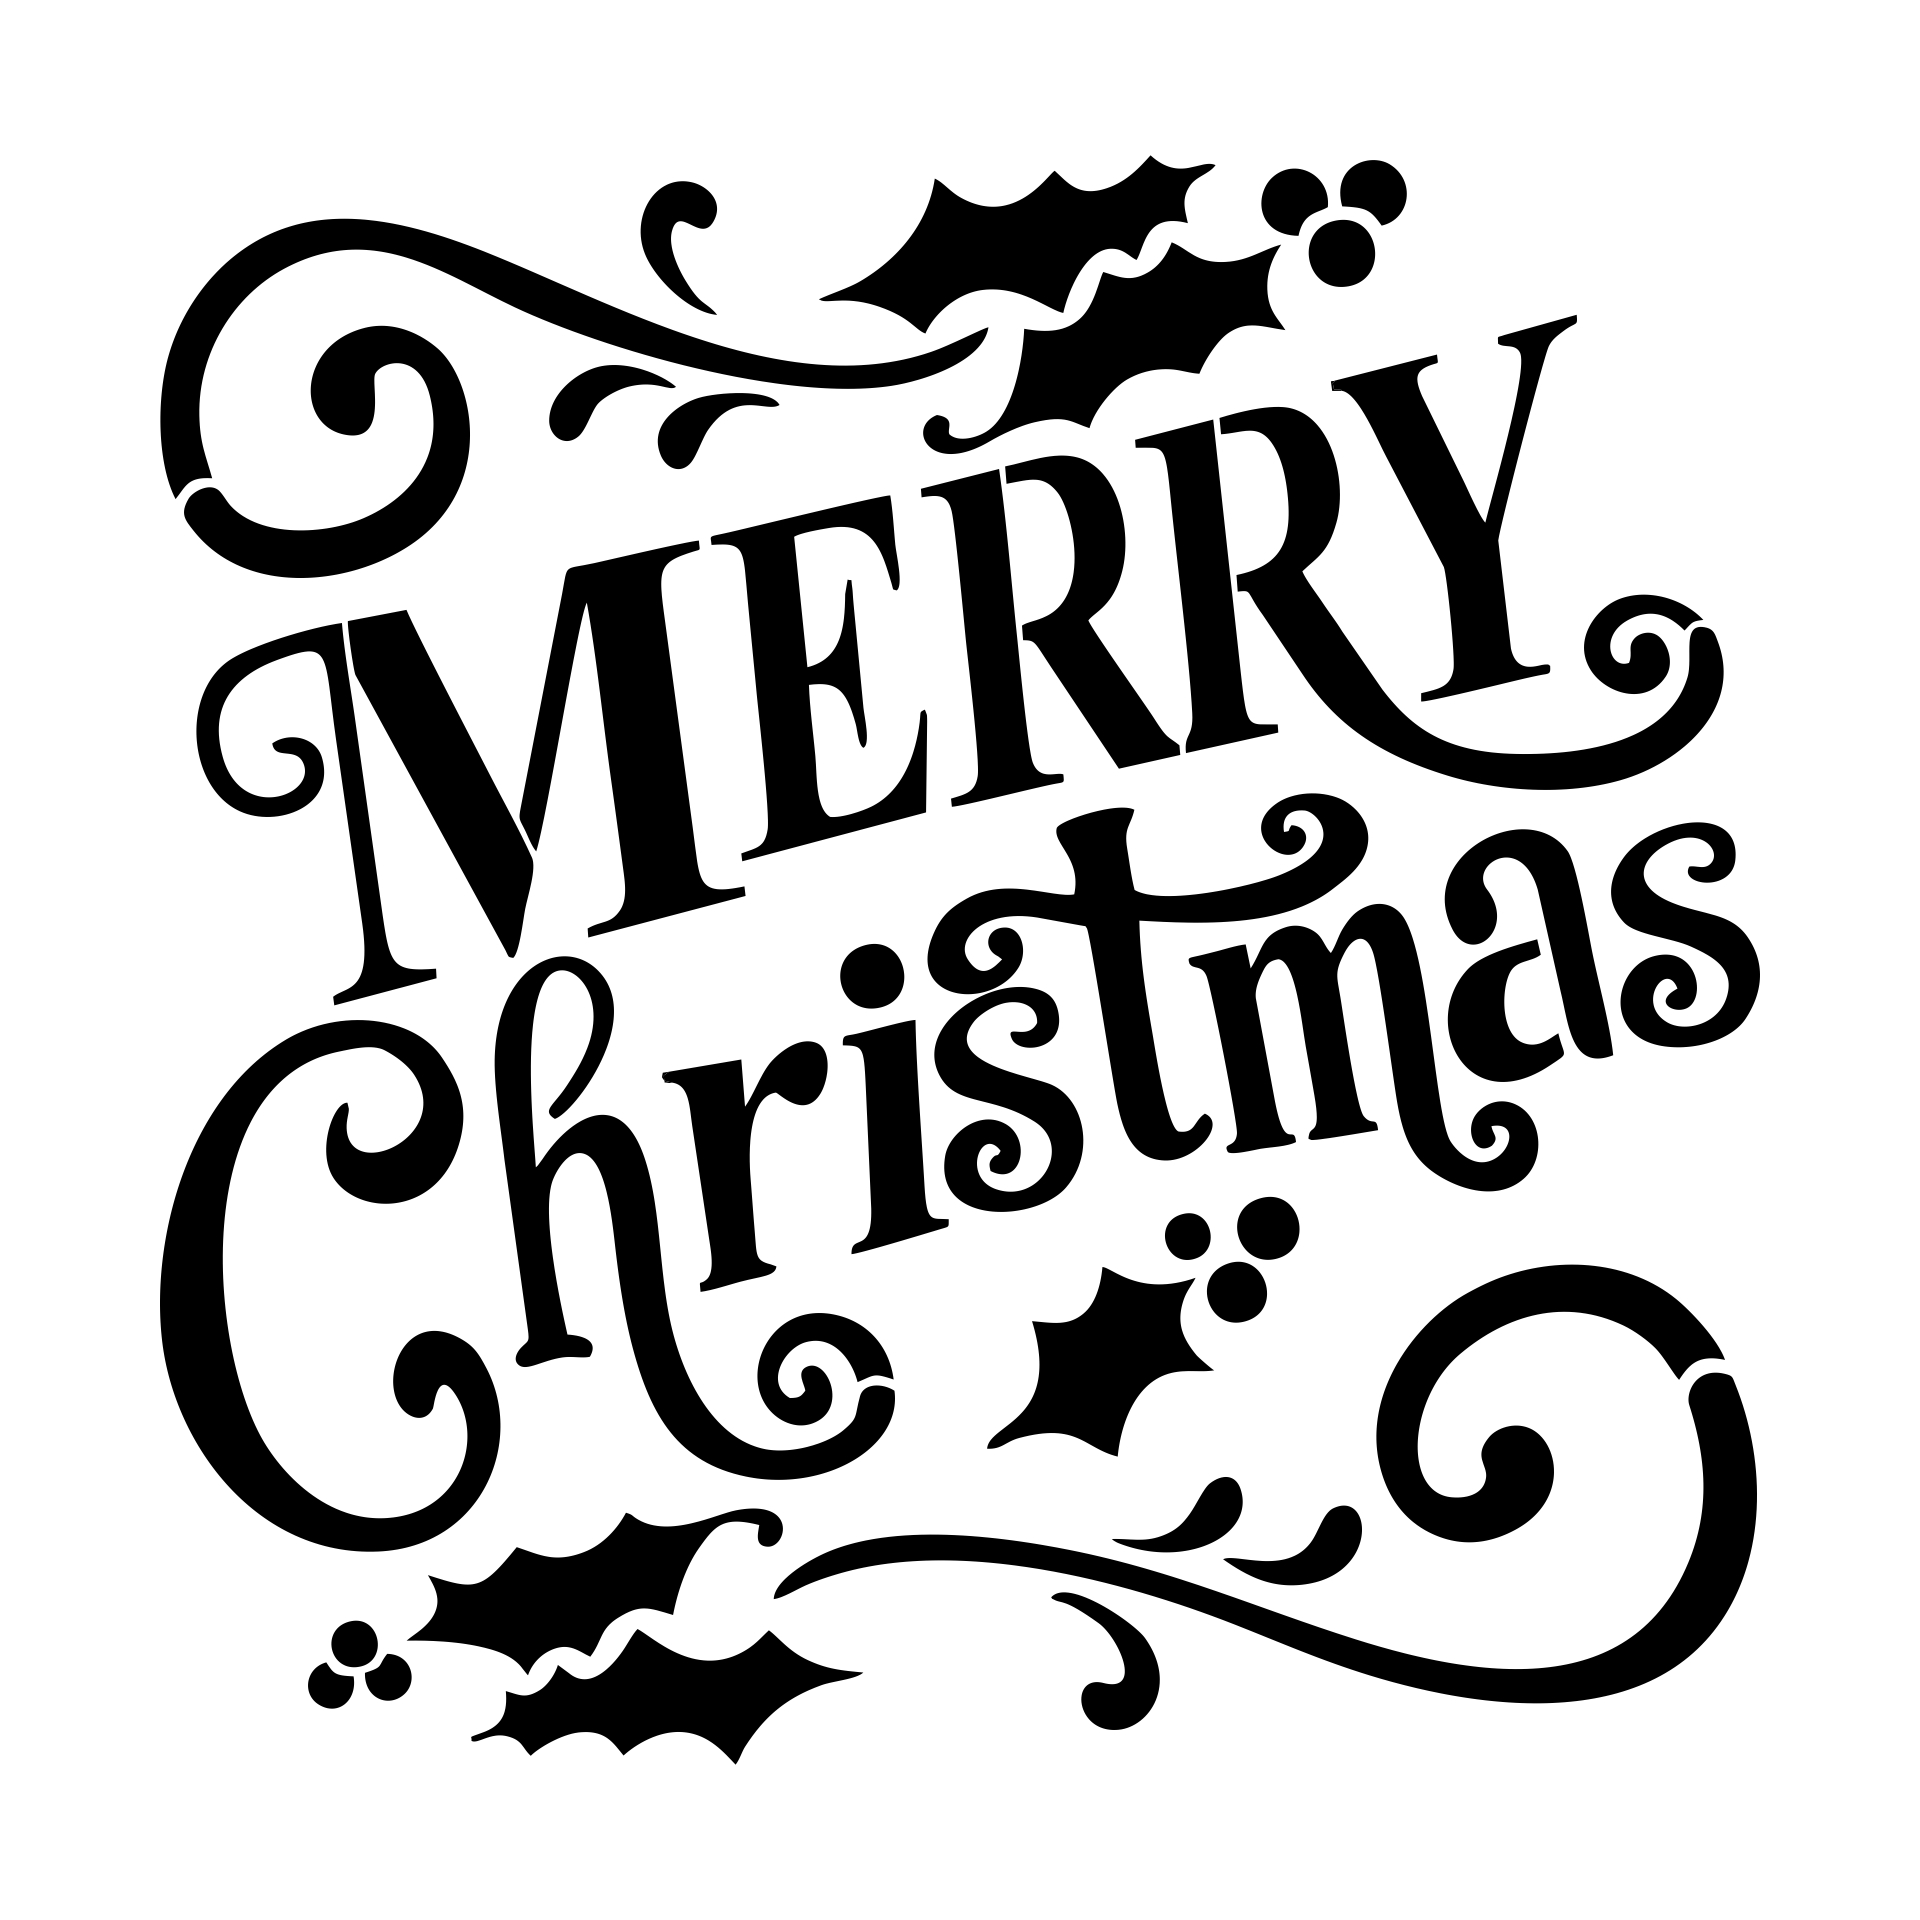 7 Best Images of Merry Christmas Free Printable Stencil - Christmas